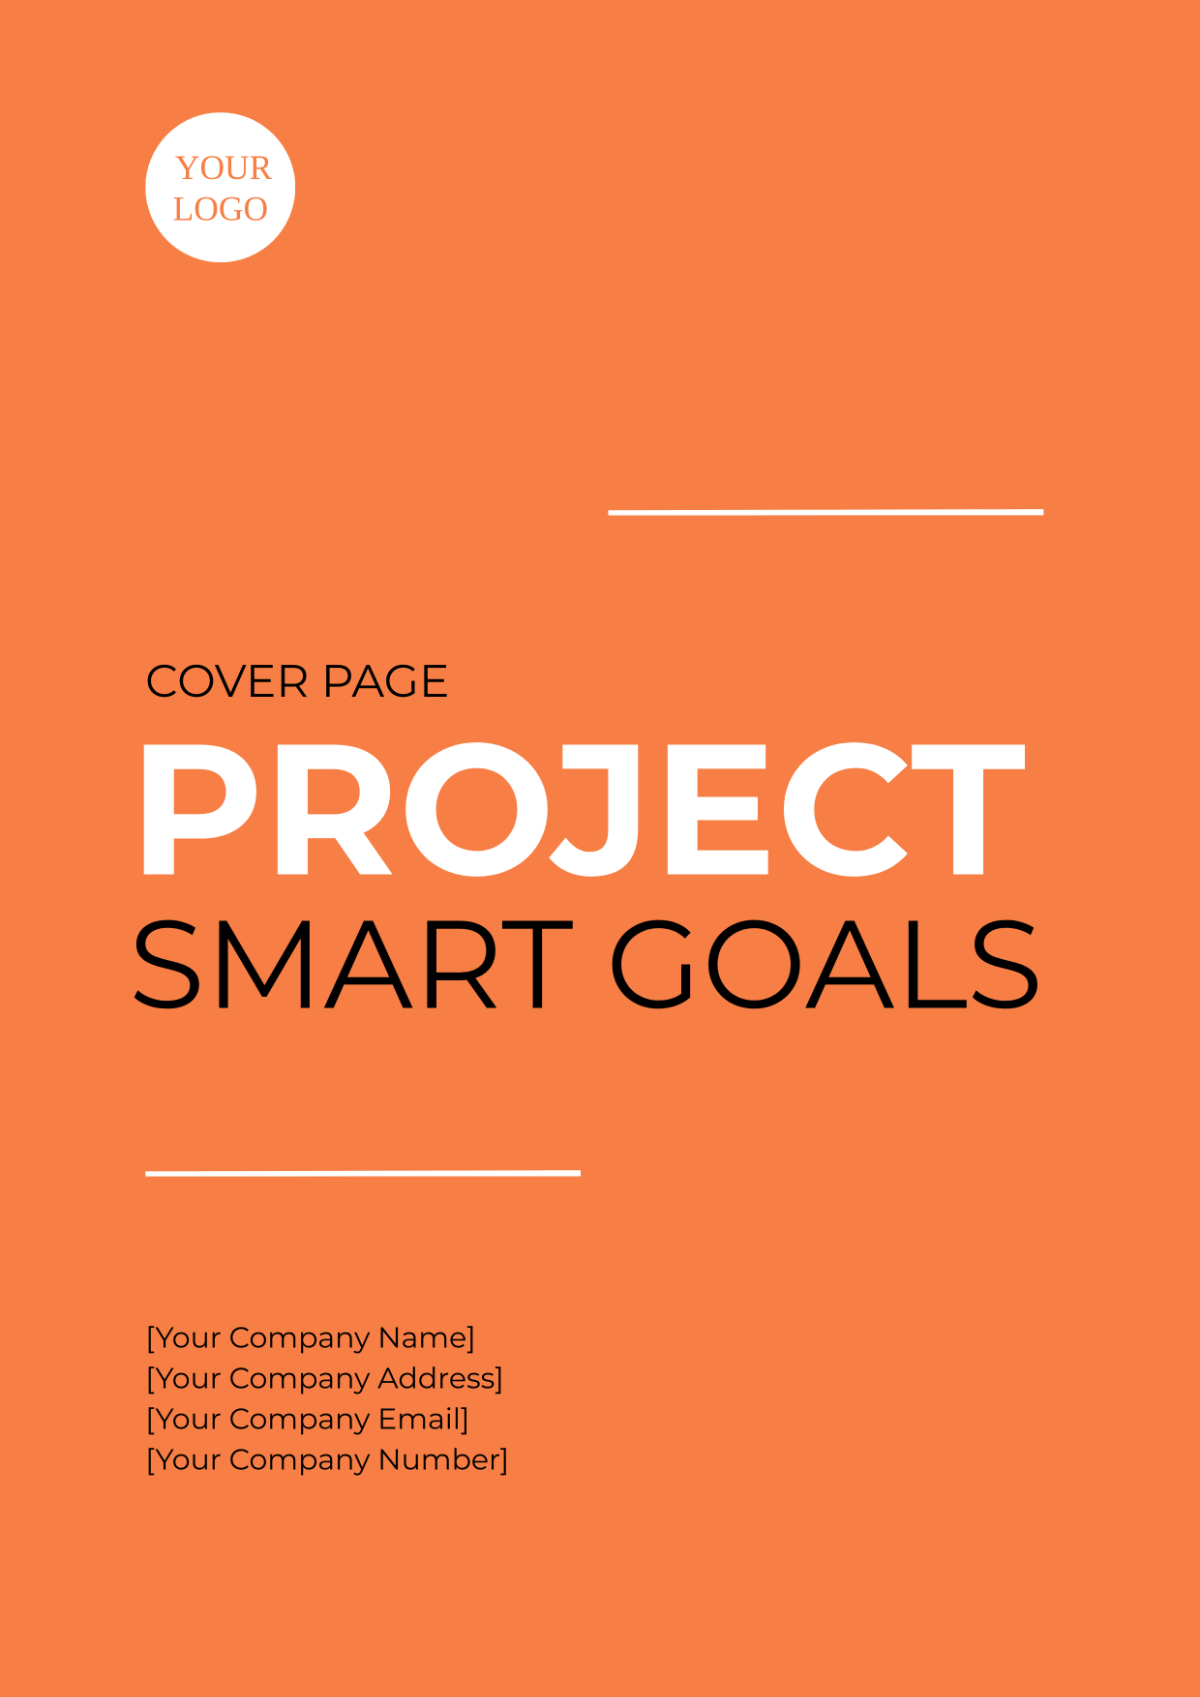 Project SMART Goals Cover Page